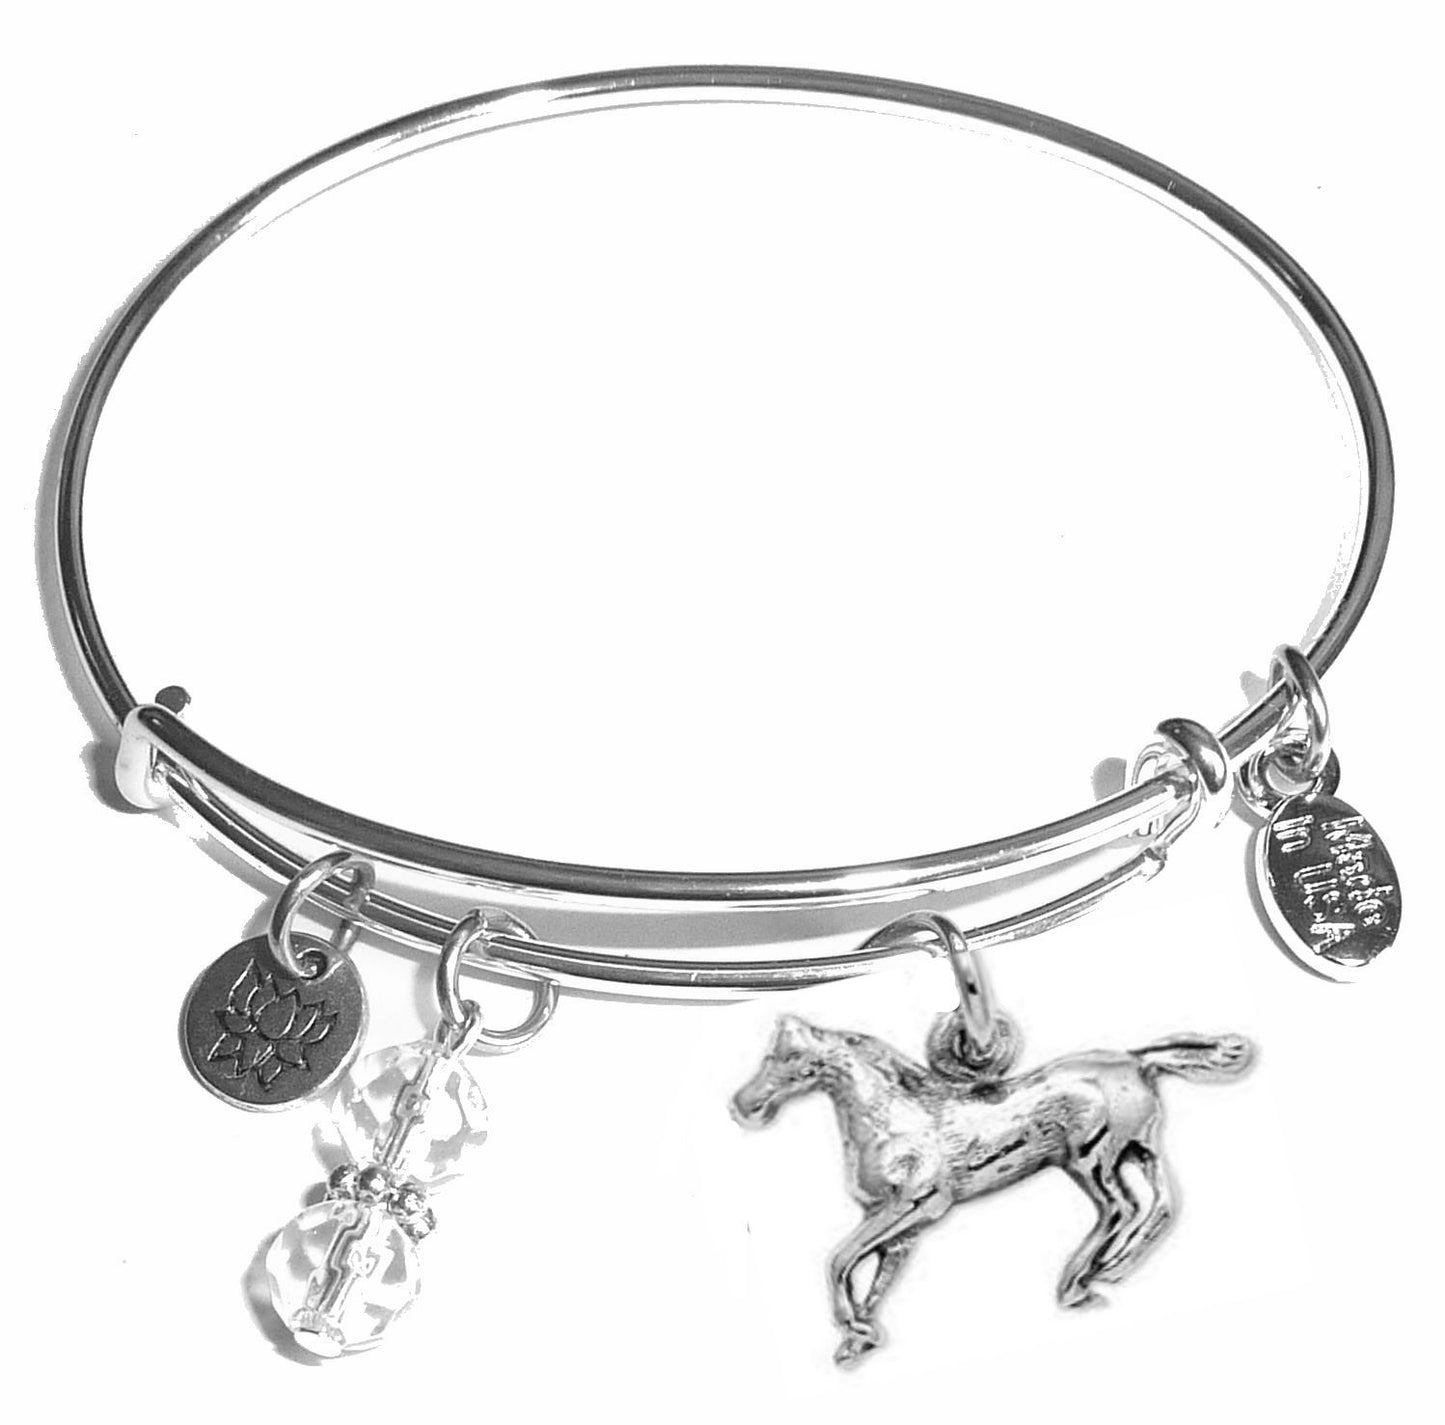 Horse - Message Bangle Bracelet - Expandable Wire Bracelet– Comes in a gift box